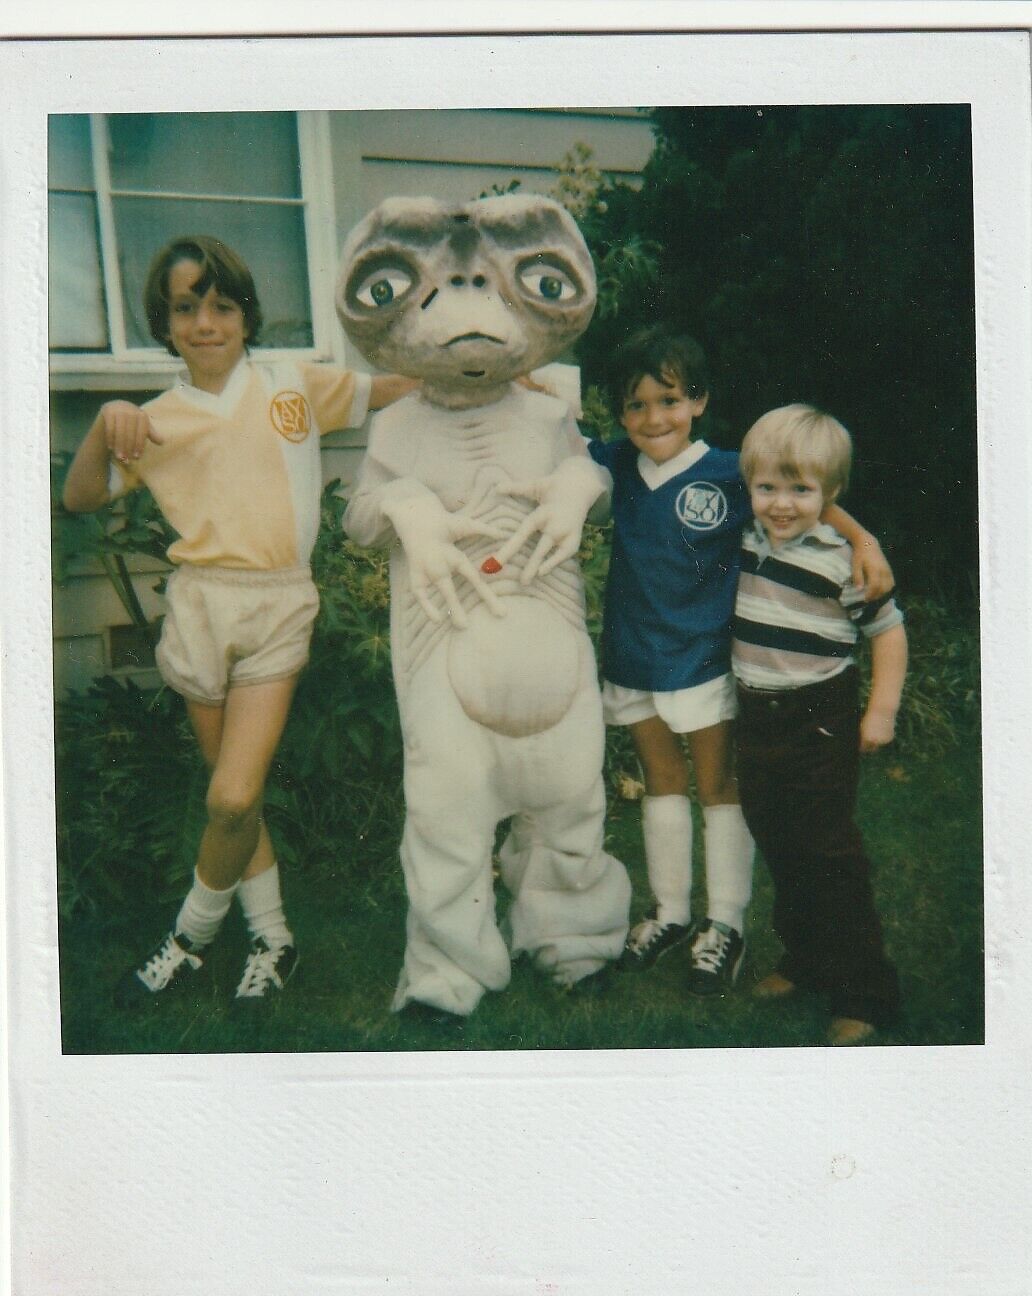 VINTAGE PHOTO/POLAROID:  KID IN CUTE E.T. HALLOWEEN COSTUME WITH FRIENDS